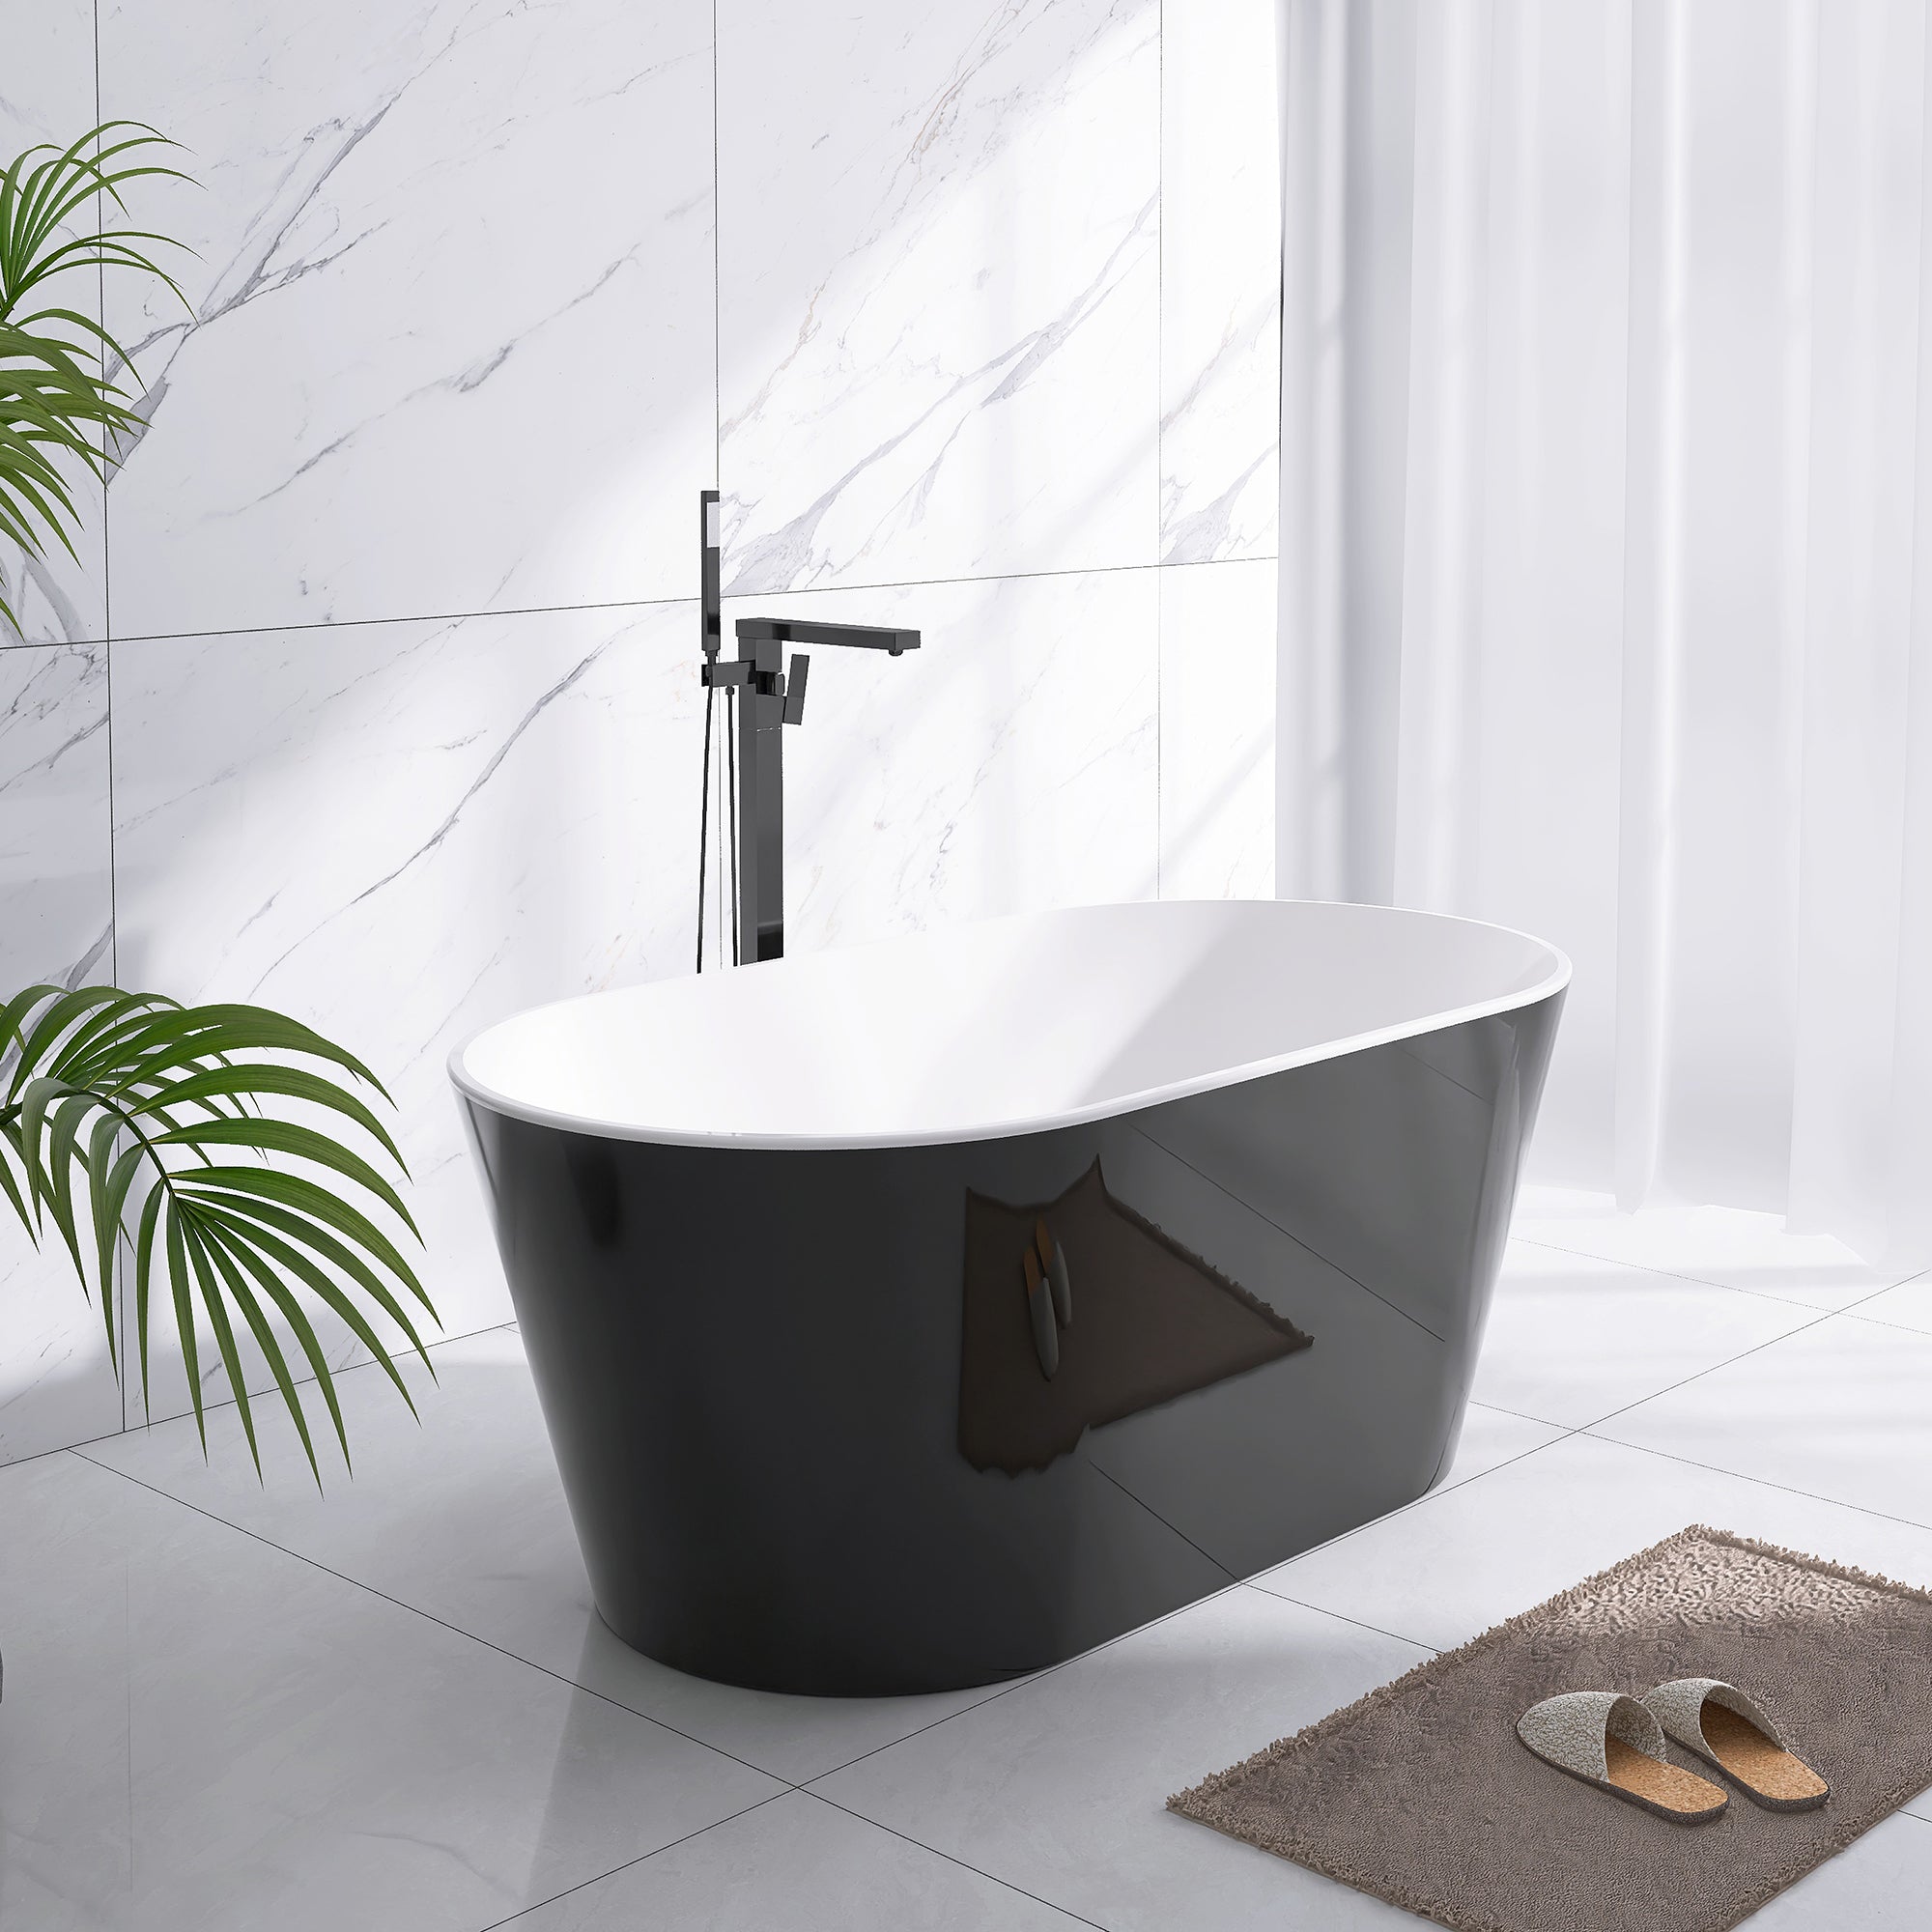 Staykiwi Acrylic Freestanding Soaking Bathtub in Glossy White and Black with Chrome Drain